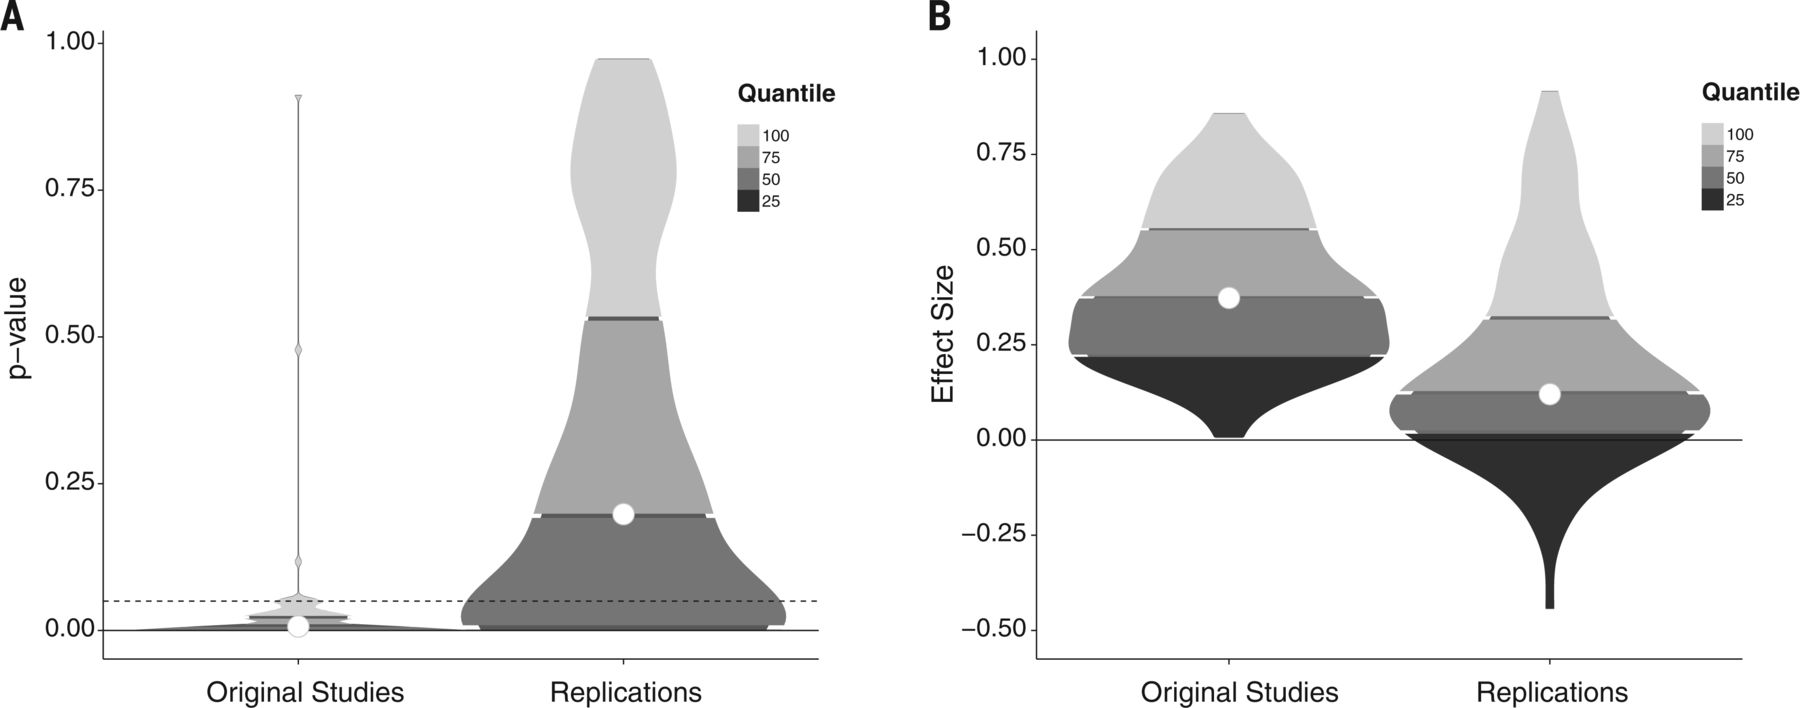 Figure 1 from [@collaboration_estimating_2015](https://doi.org/10.1126/science.aac4716); Density plots of original and replication P values and effect sizes. (A) P values. (B) Effect sizes (correlation coefficients). Lowest quantiles for P values are not visible because they are clustered near zero.